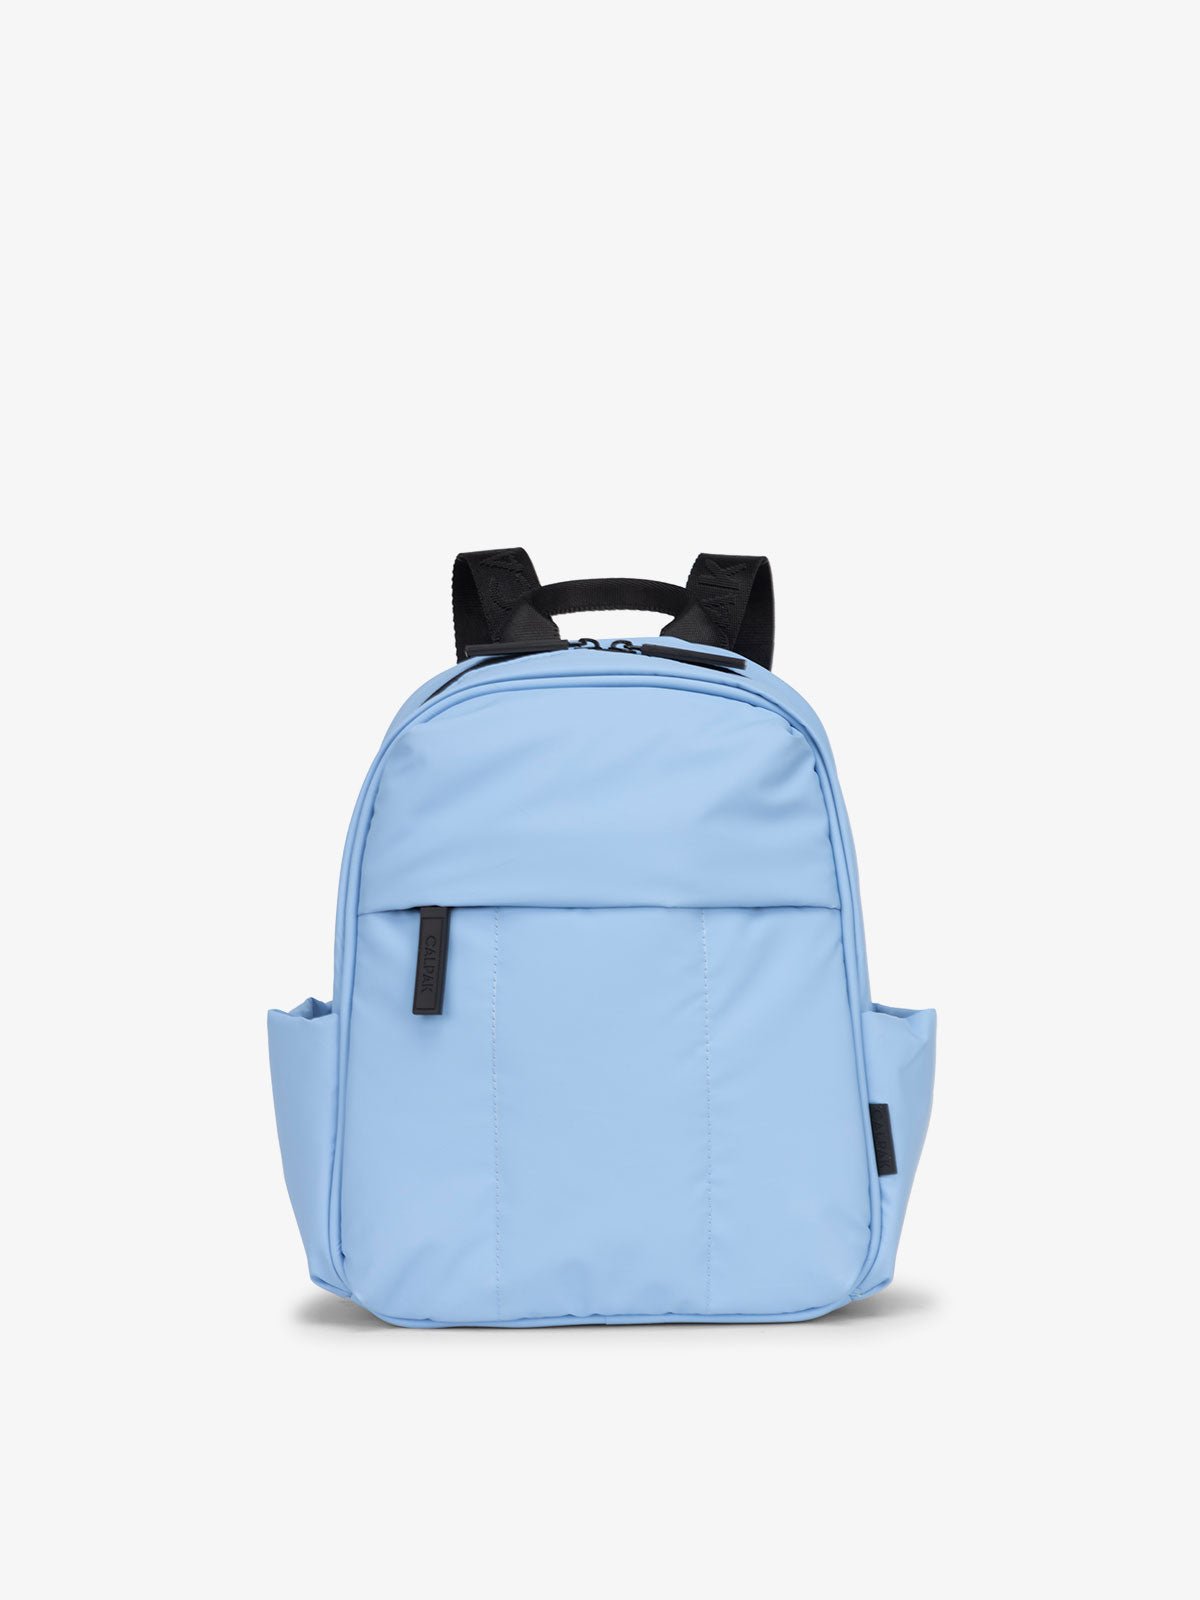 CALPAK Luka Mini Backpack for essentials for everyday use with puffy exterior and water resistant interior lining in light blue